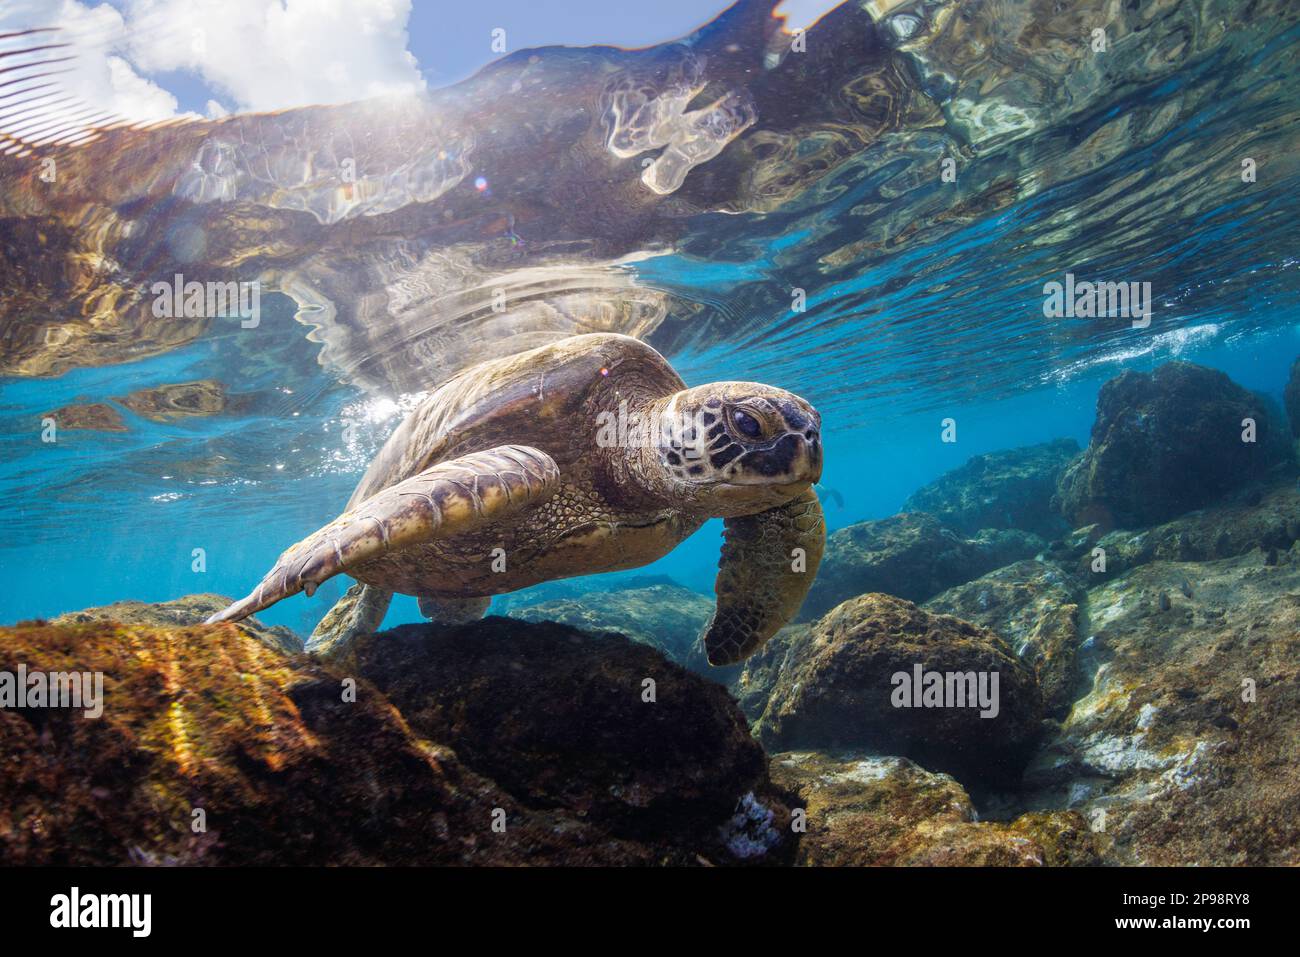 A green sea turtle, Chelonia mydas, an endangered species, searches the shallows off West Maui, Hawaii for algae to dine on. Stock Photo